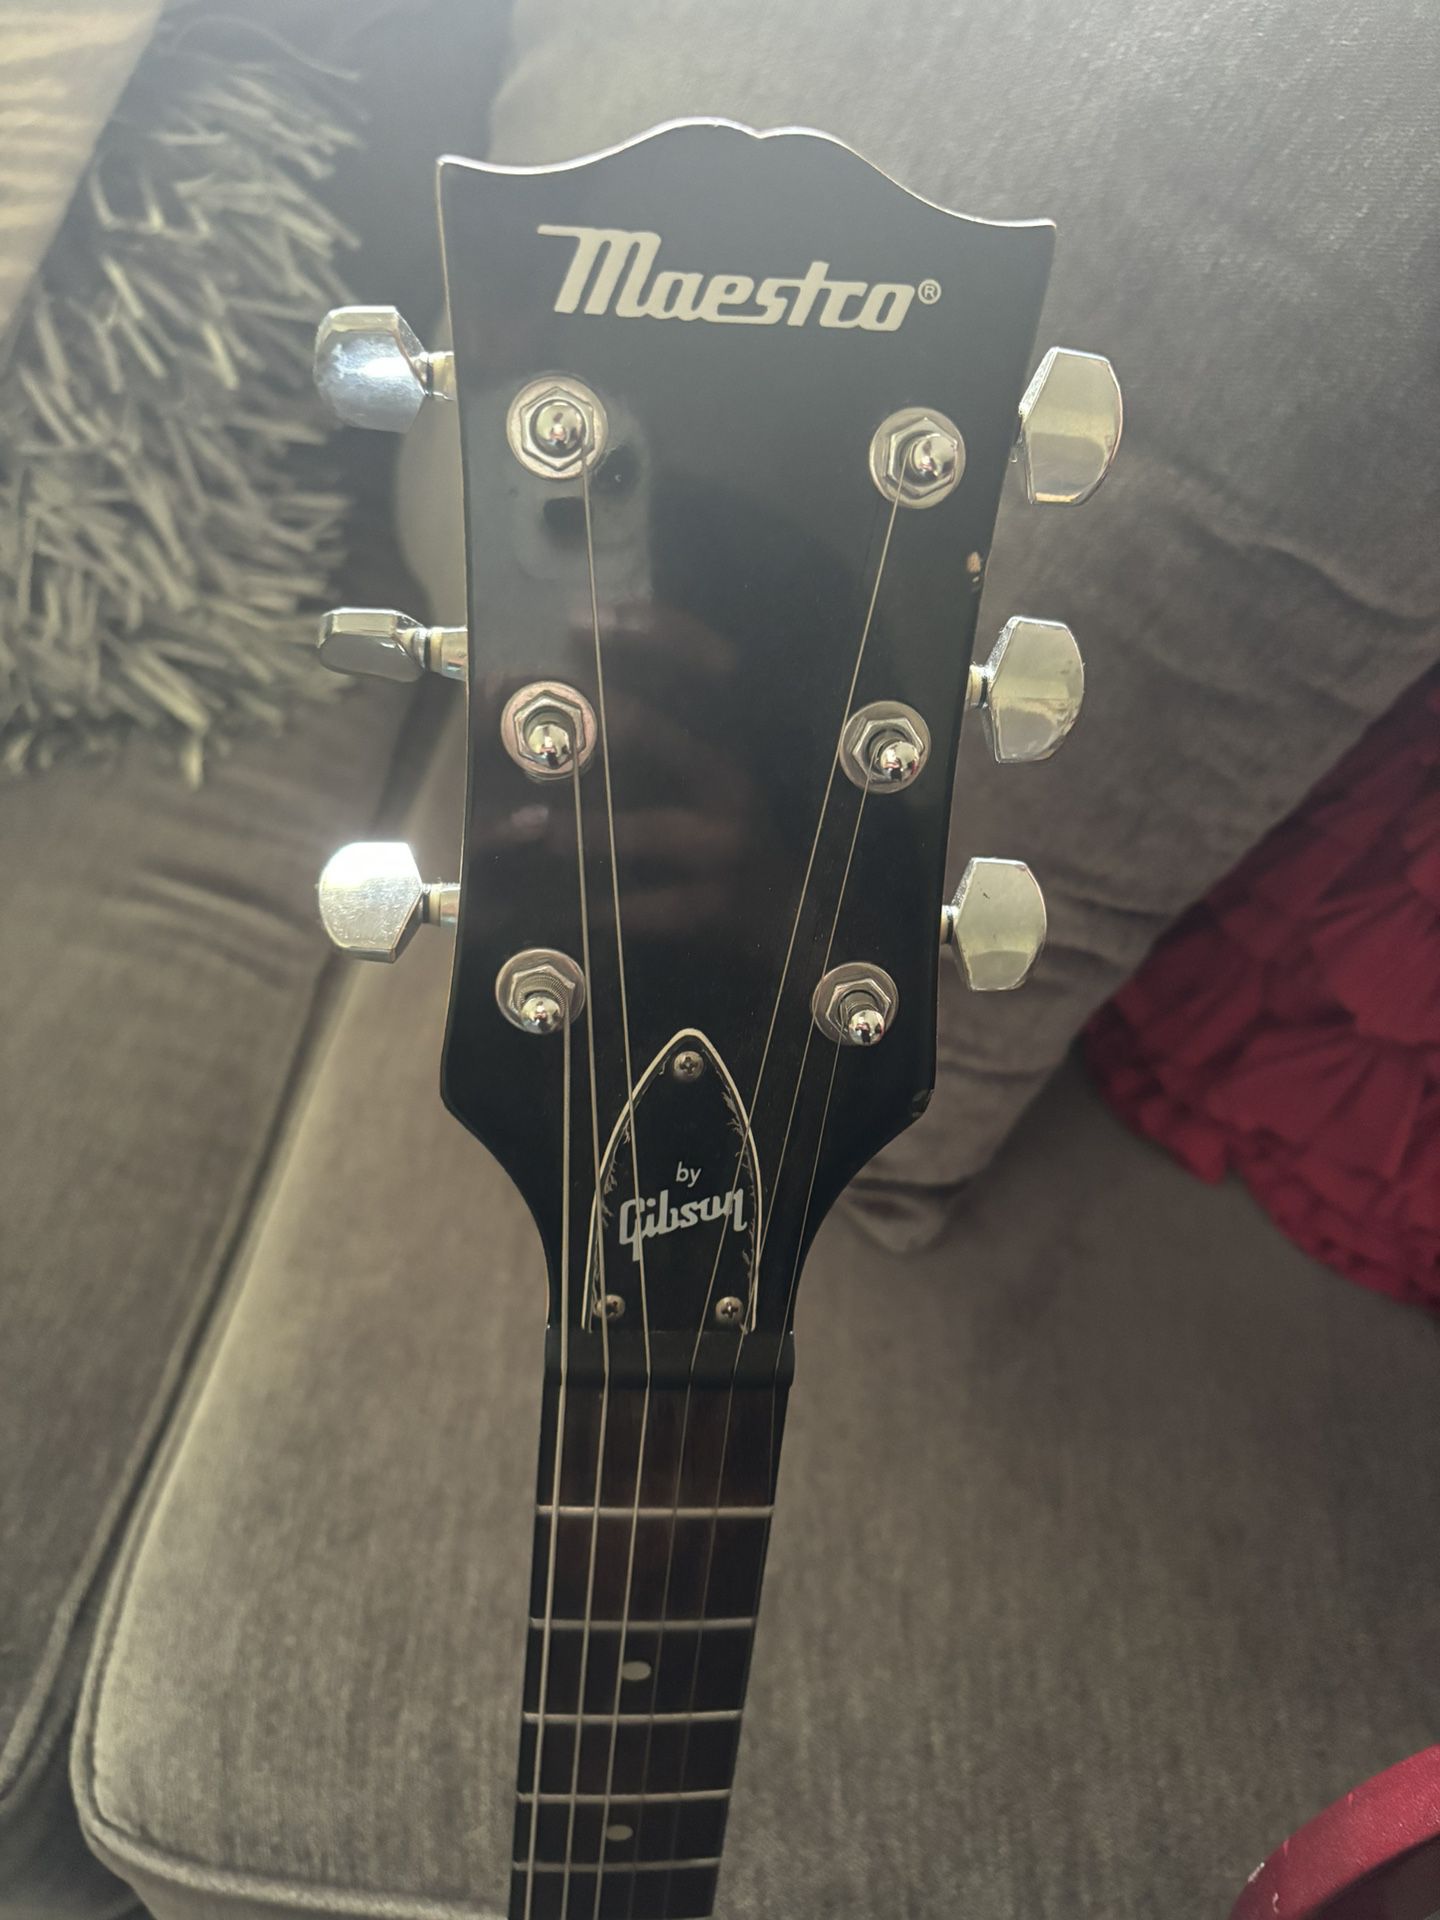 Maestrco By Gipson Guitar 